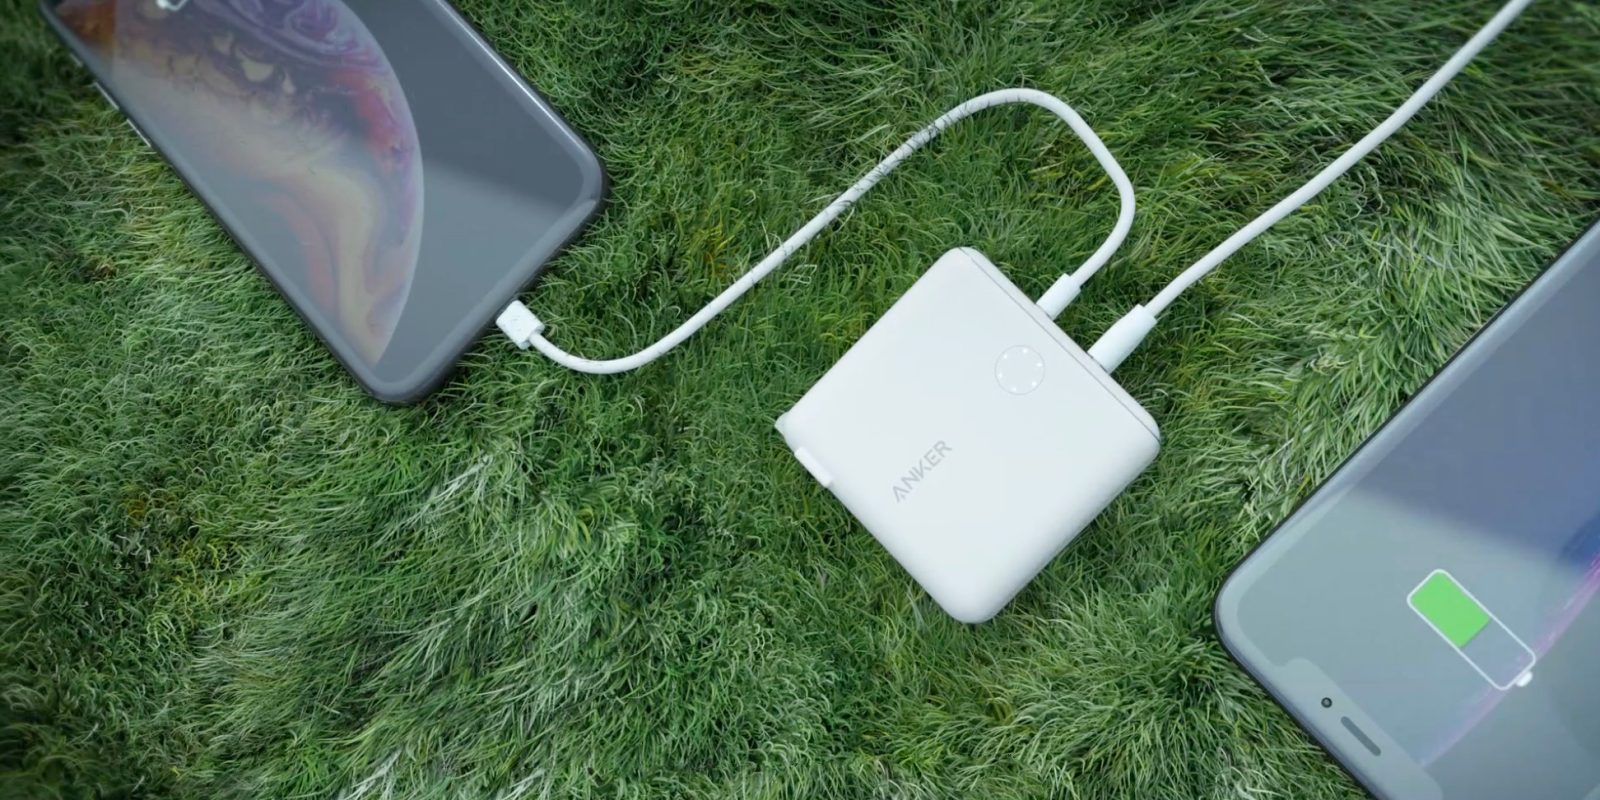 Anker launches internal battery-powered wall charger to work away from power outlet